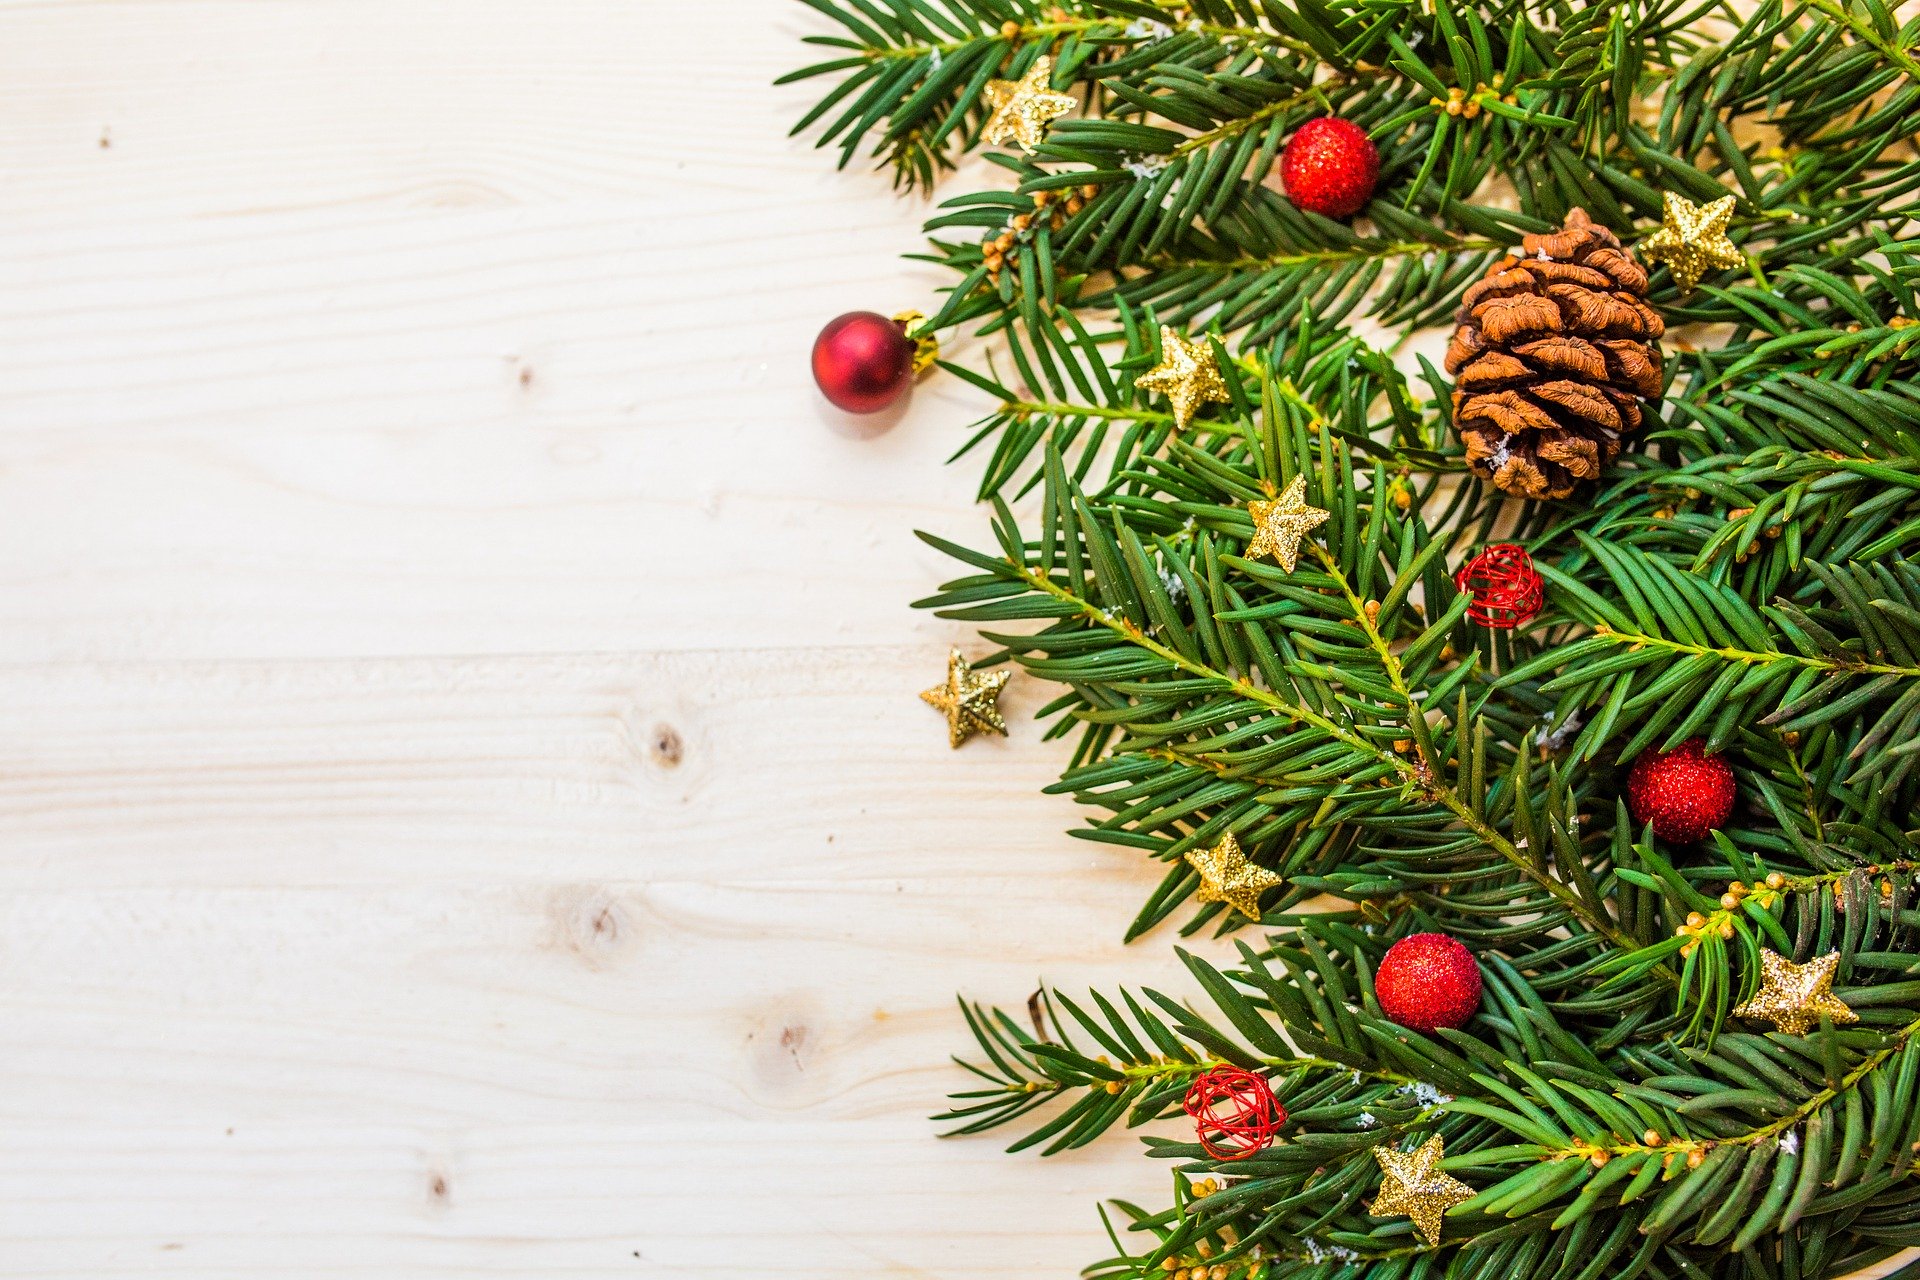 Generic Christmas graphic with pine needles laying on wood.